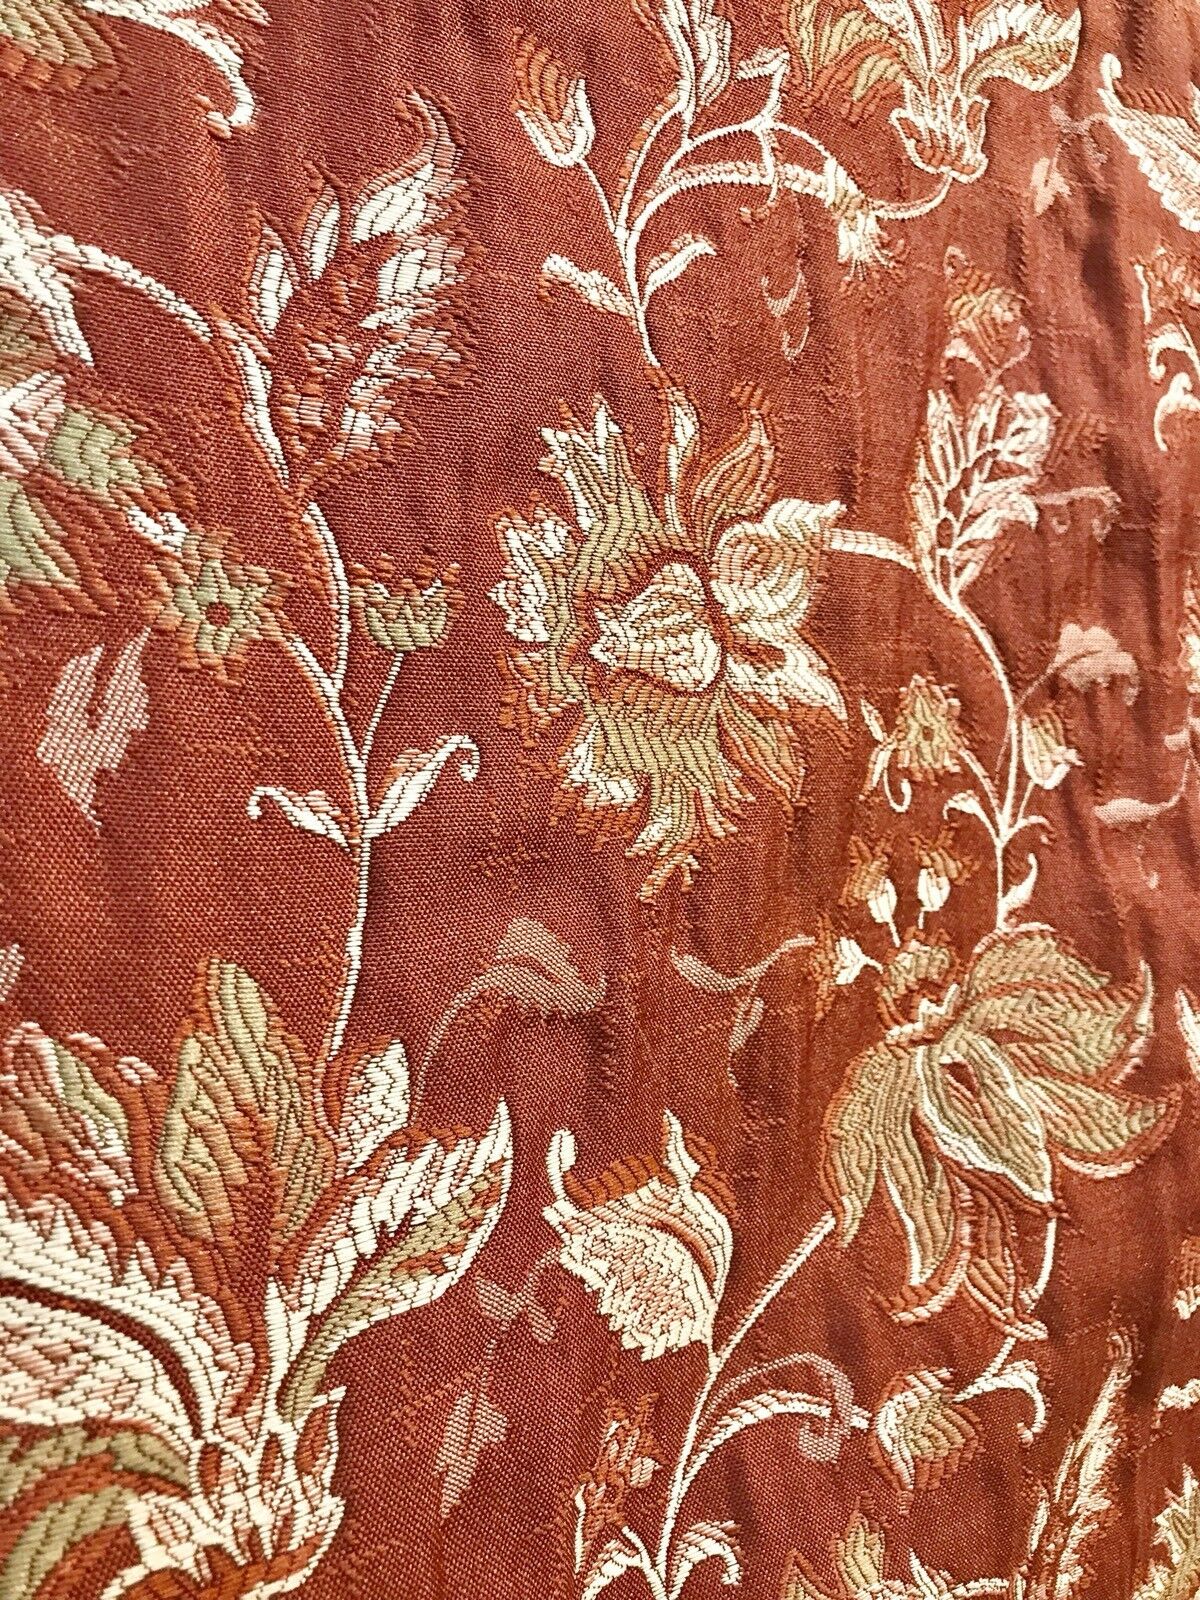 NEW! Designer Quilted Brocade Floral Upholstery Fabric- Rust Brick Red | www.fancystylesfabric.com